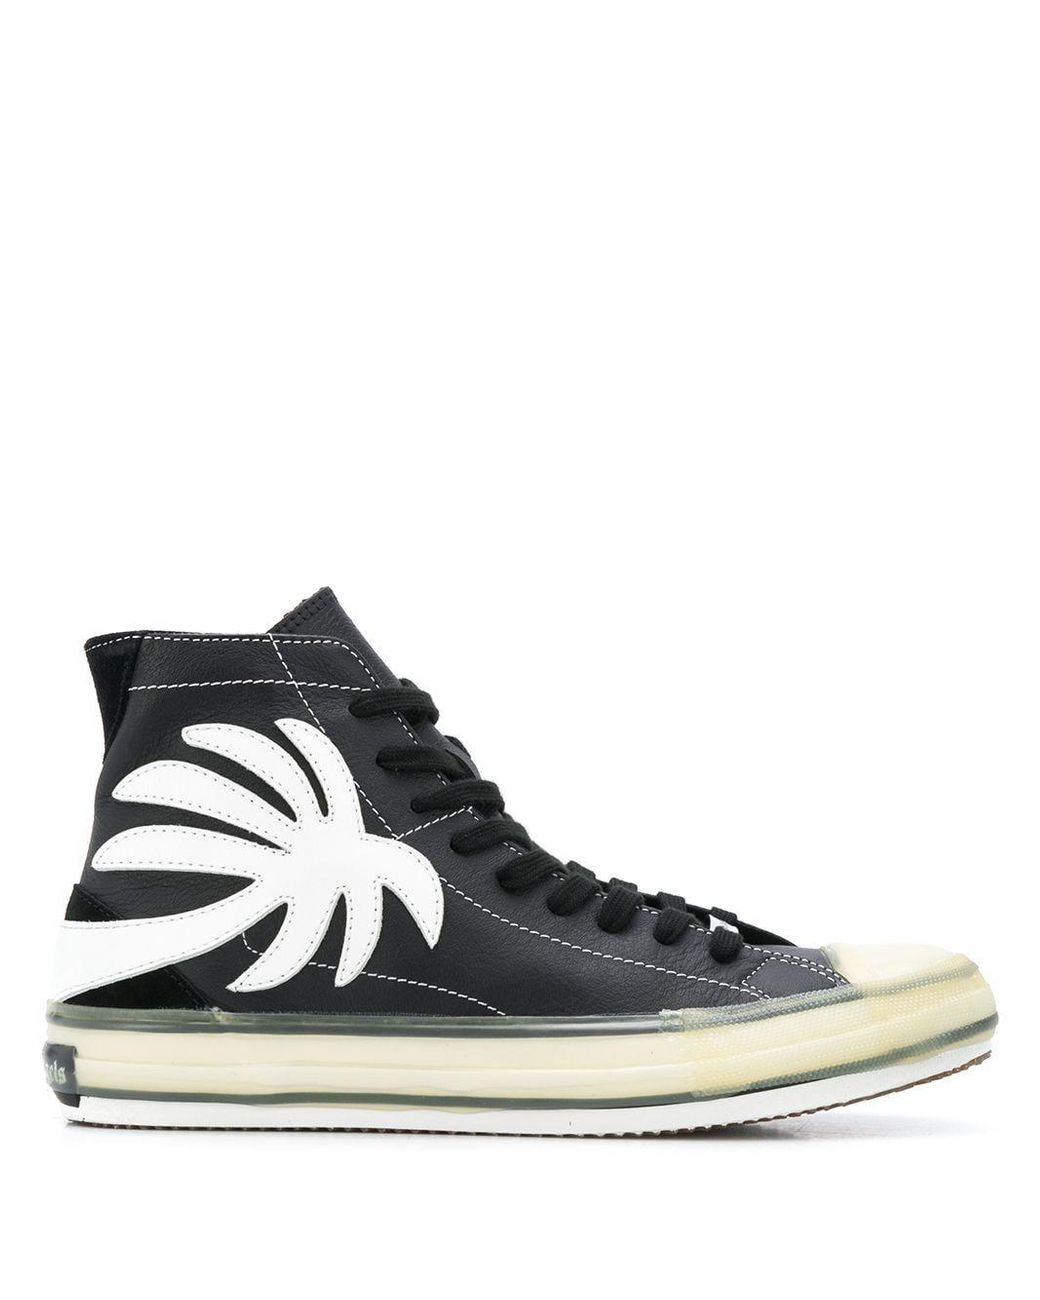 Palm Angels Leather Hi Top Sneakers in Black for Men - Lyst